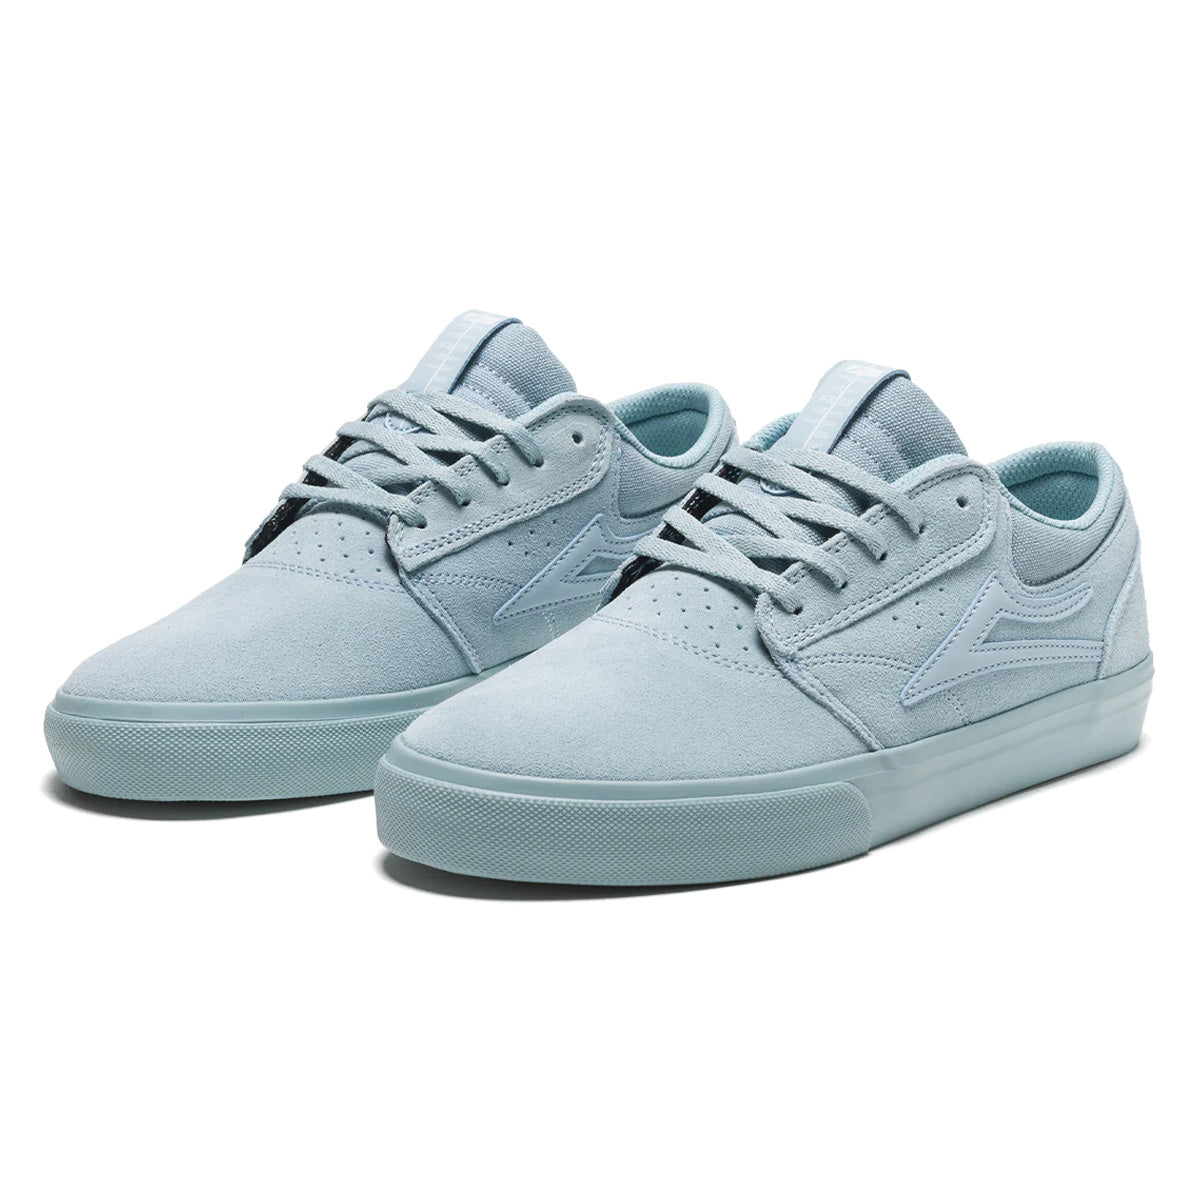 Lakai Griffin Shoes - Muted Blue Suede